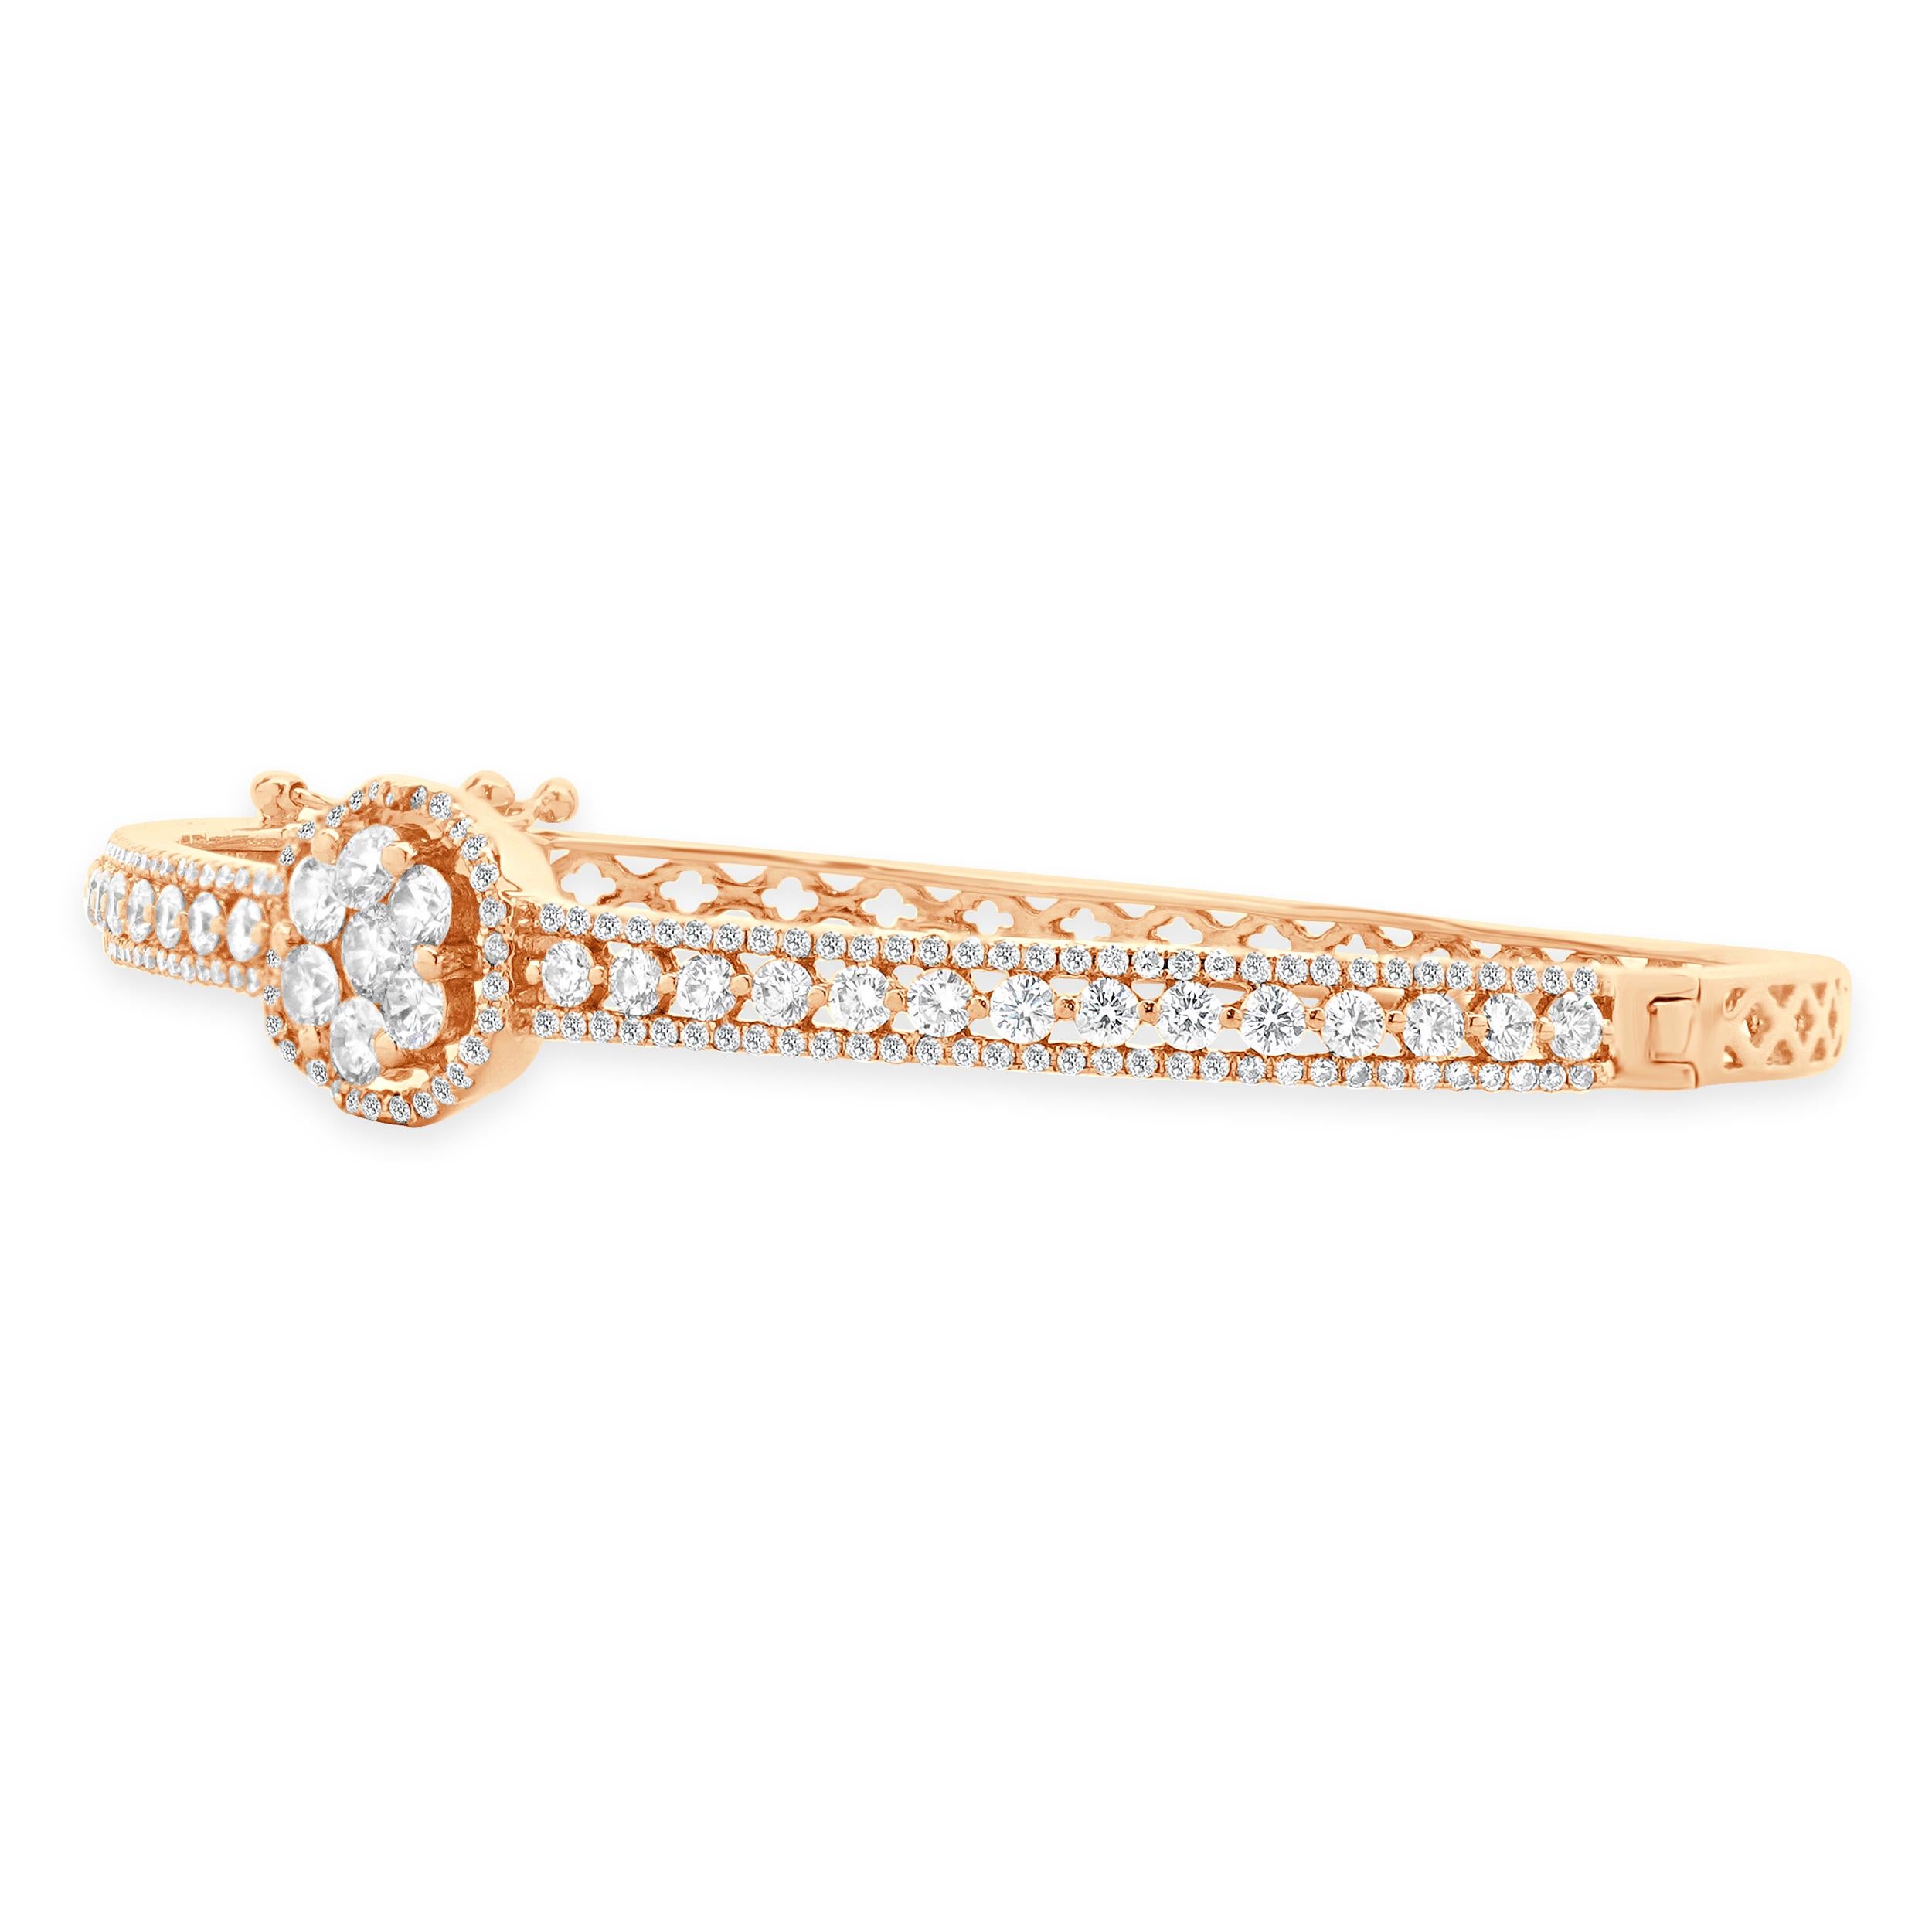 Designer: custom
Material: 14K rose gold
Diamond: 193 round brilliant cut = 1.90cttw
Color: G
Clarity: SI2-I1
Dimensions: bracelet will fit up to a 6.5-inch wrist
Weight: 10.36 grams
